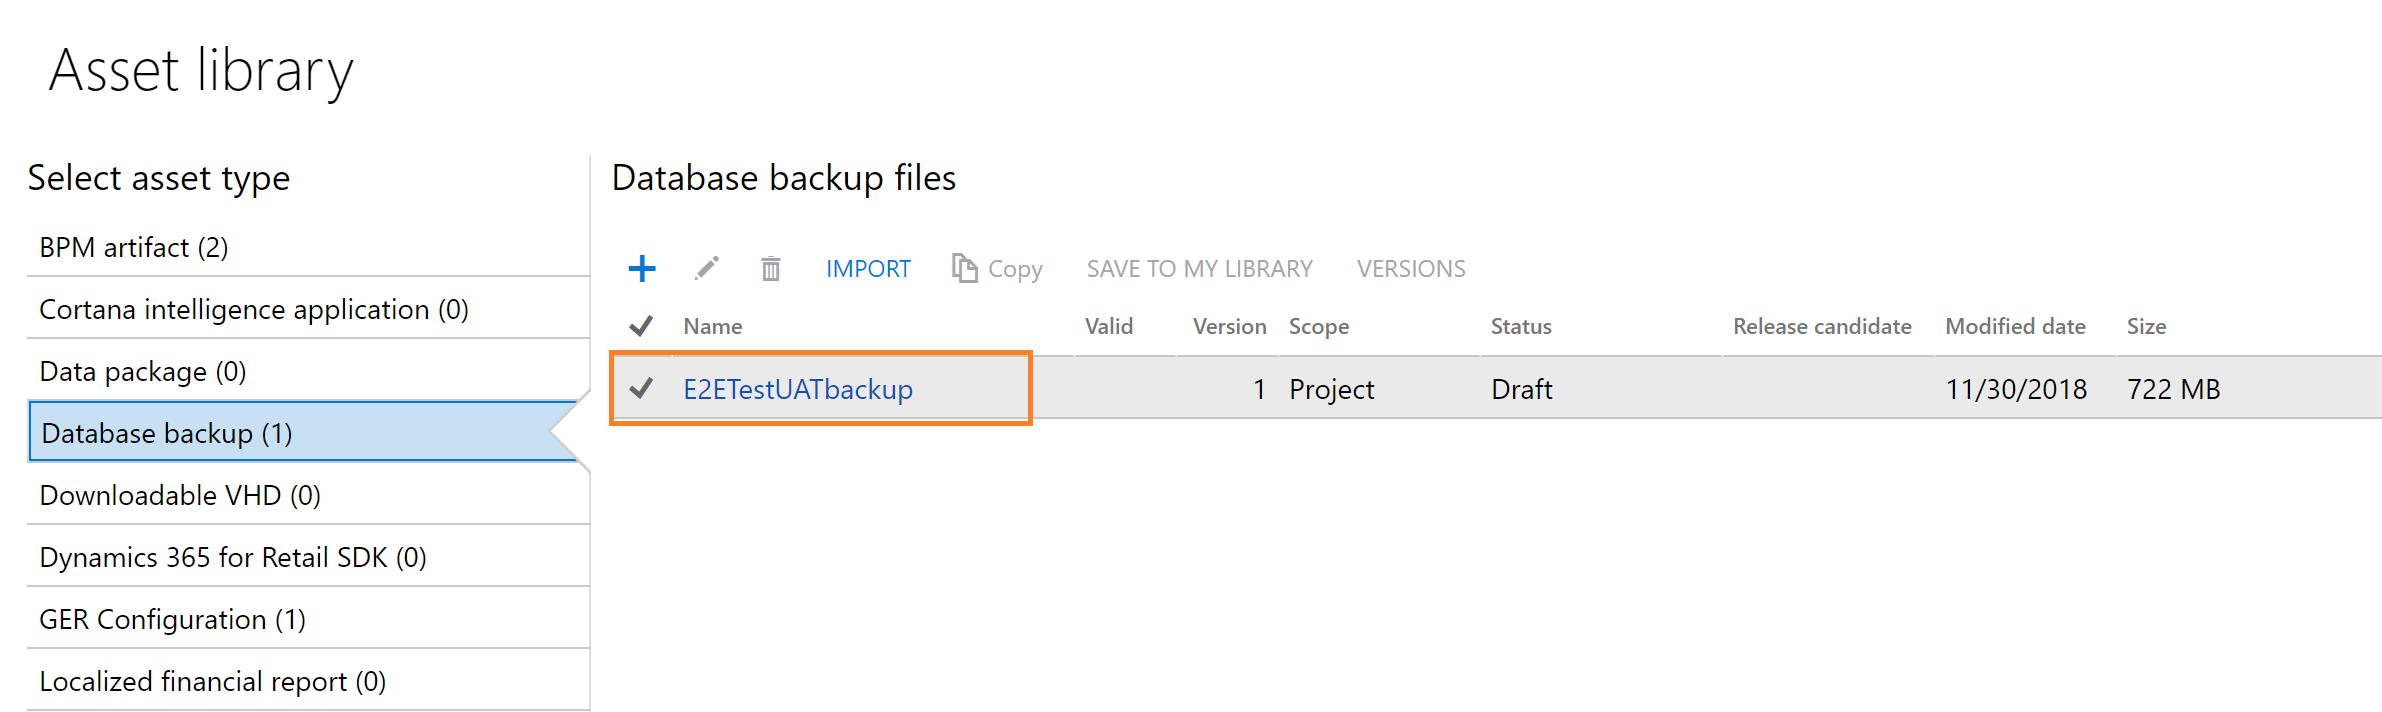 Asset library backup files.